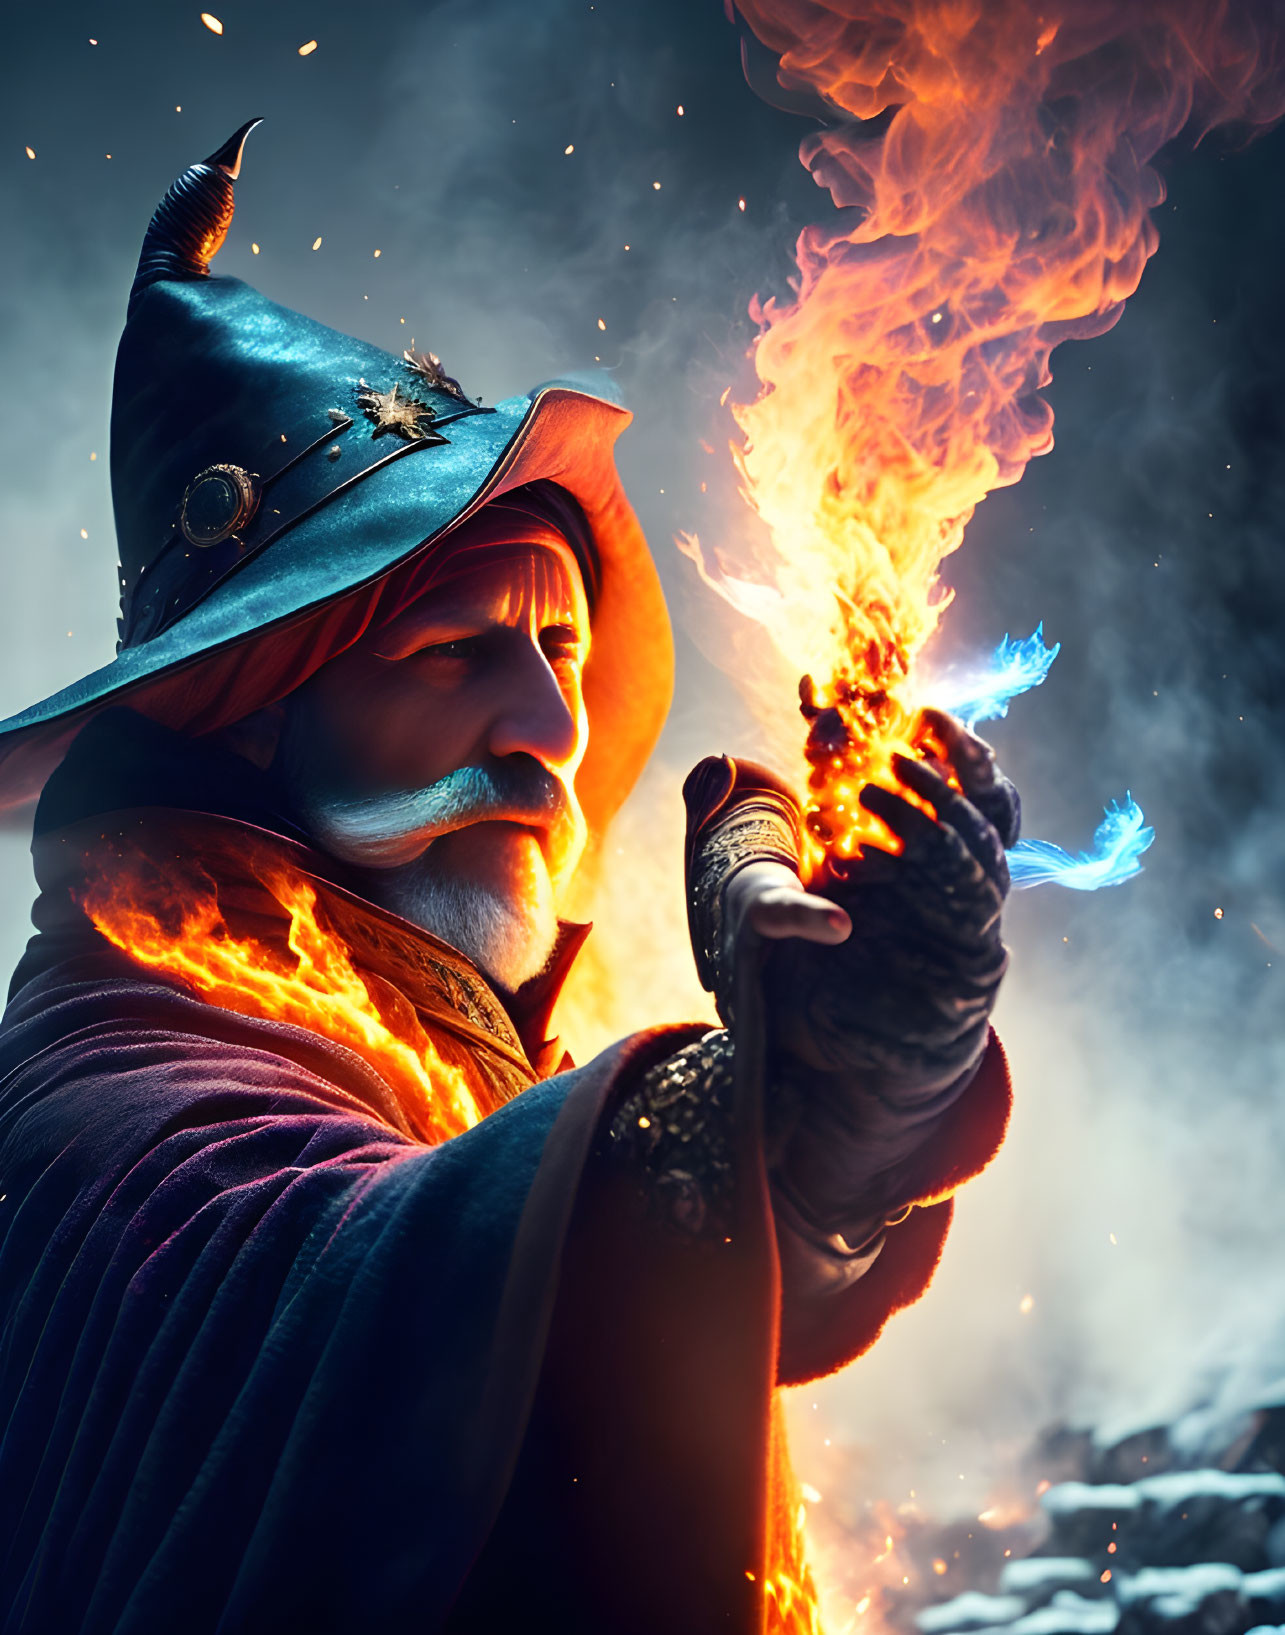 Wizard in blue hat casting fiery magic with intense flames against mystical backdrop